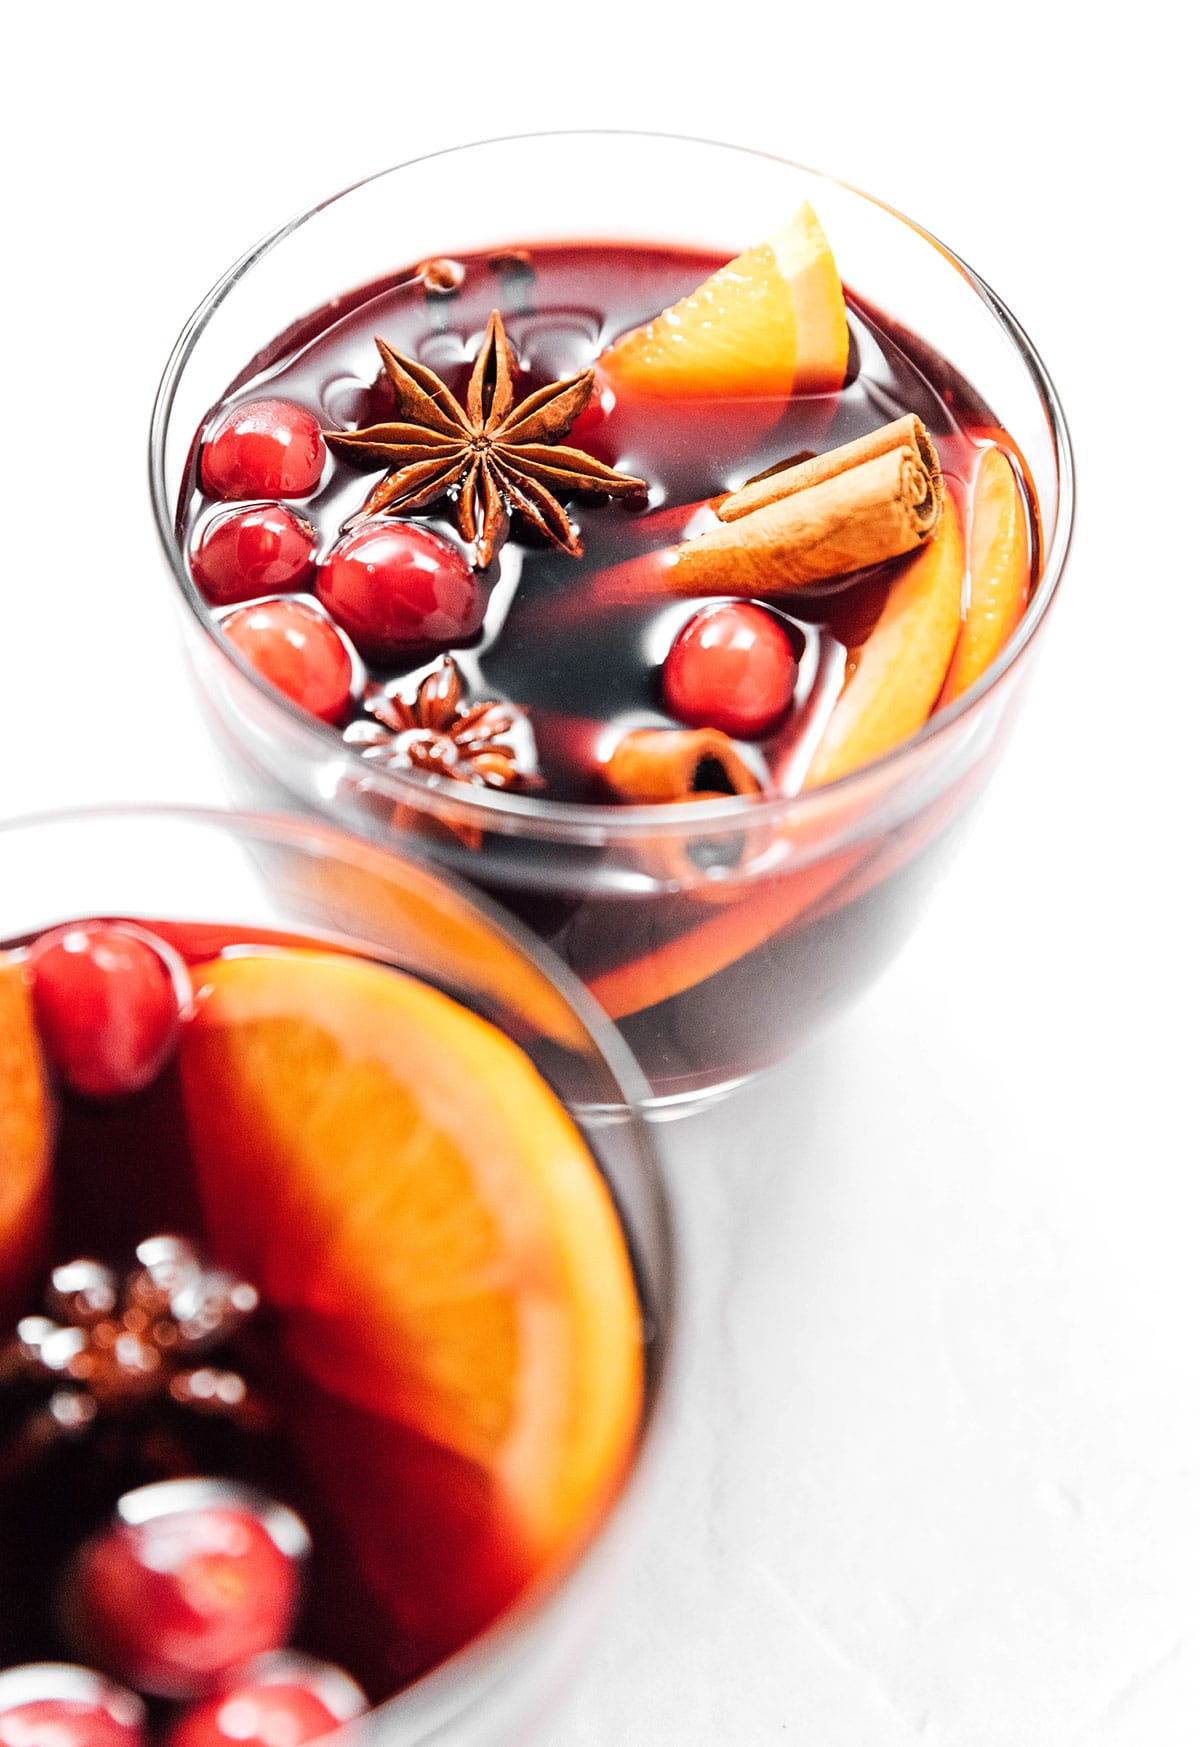 Two short glasses filled with orange mulled wine and garnished with star anise, cranberries, orange slices, and cinnamon sticks